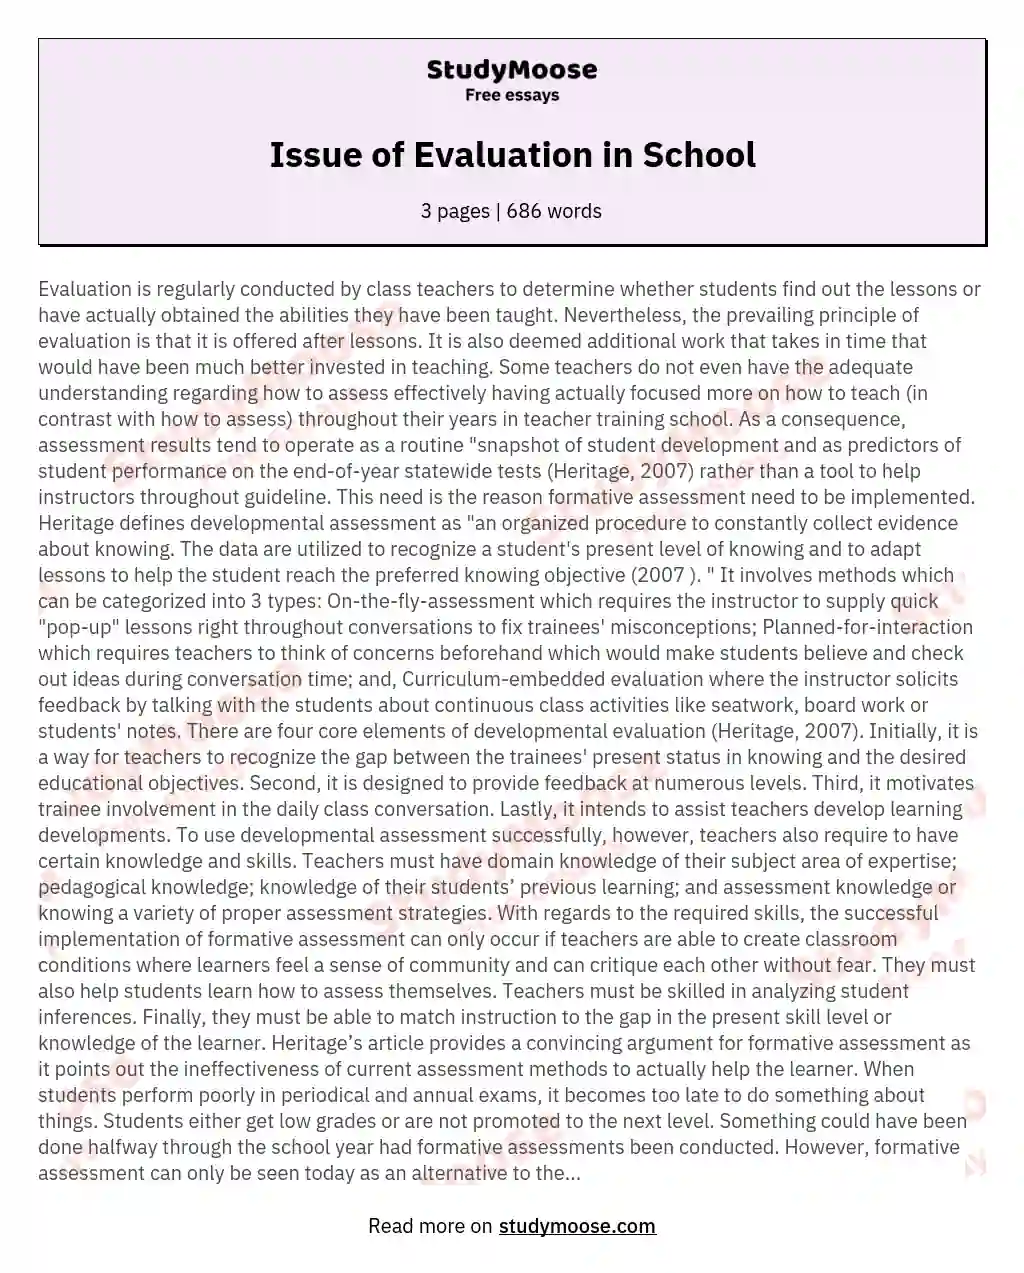 Issue of Evaluation in School essay